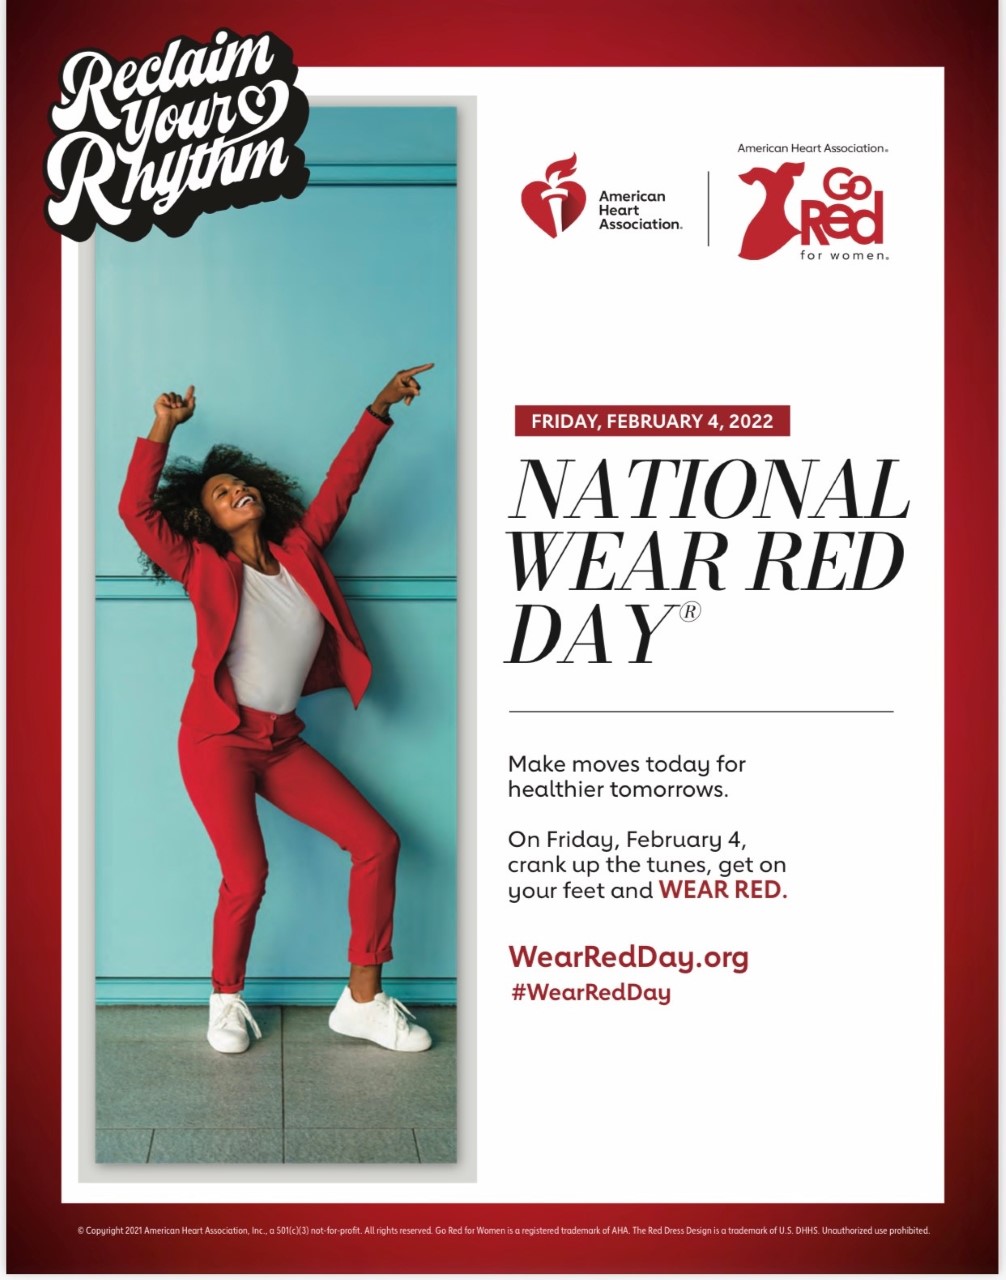 American Heart Association: To Support Women's Heart Health, National Wear Red Day On Feb. 4 - CBS Detroit